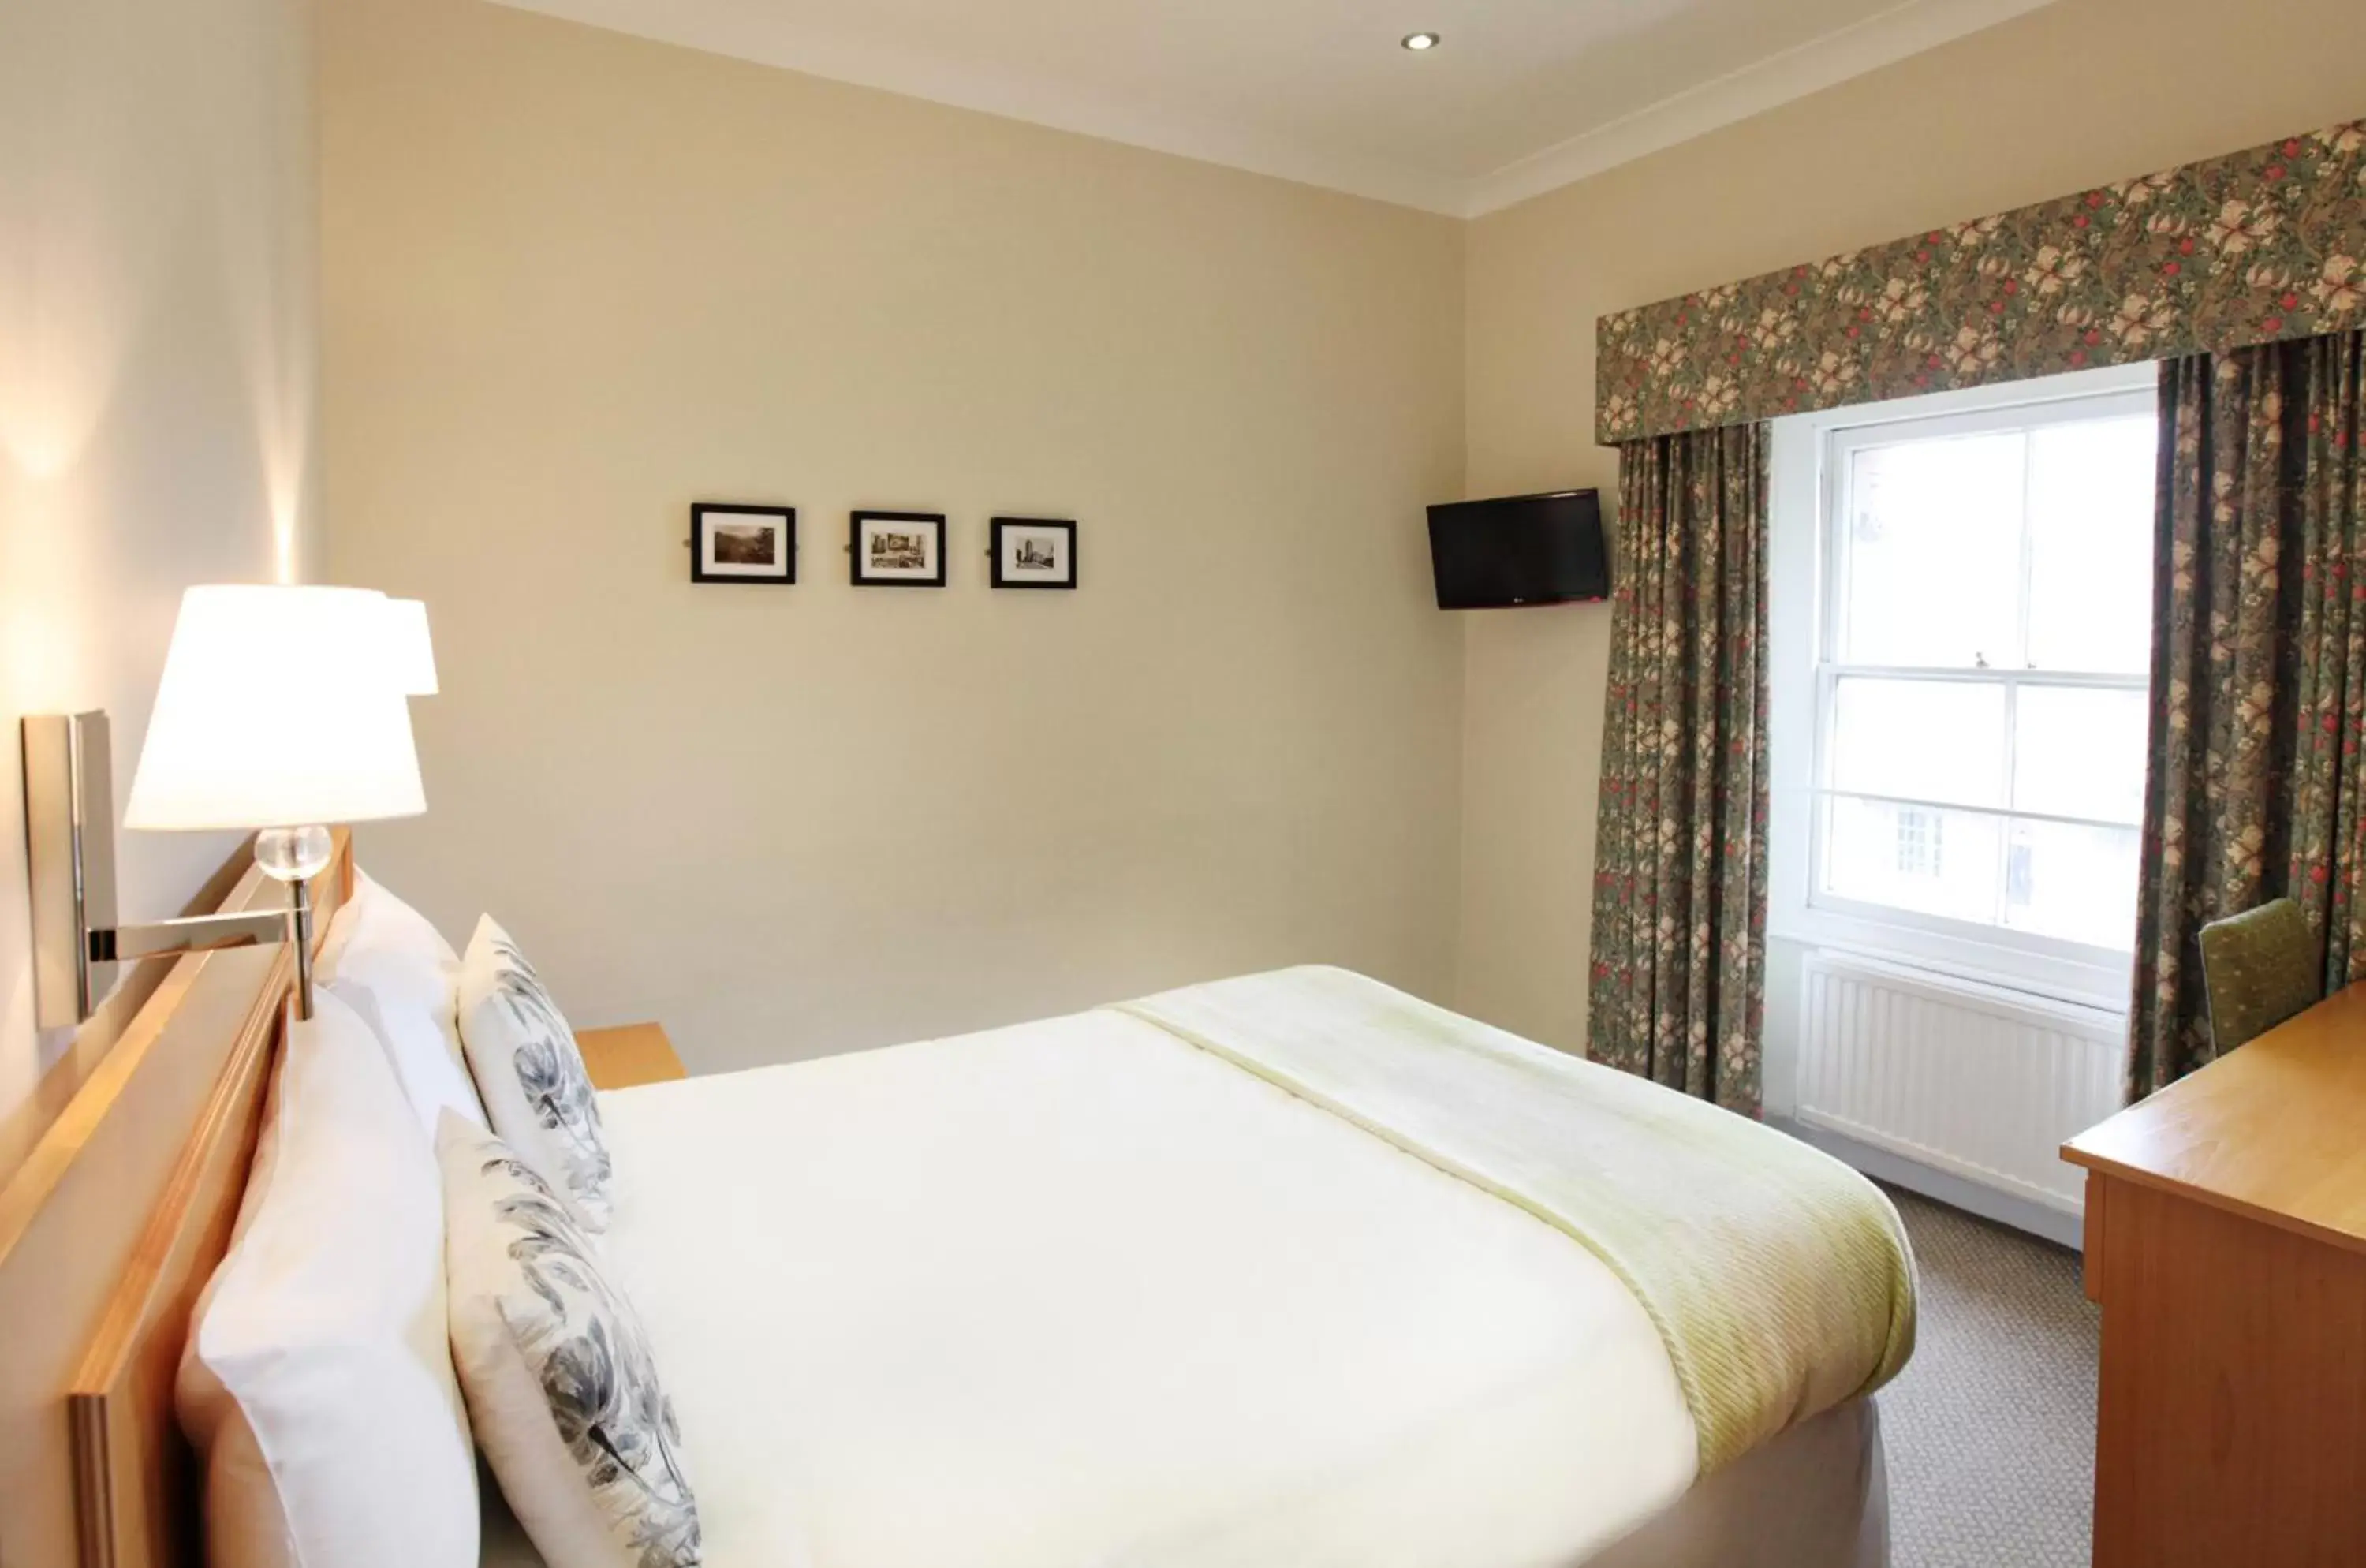 Bedroom, Room Photo in Victoria Square Hotel Clifton Village